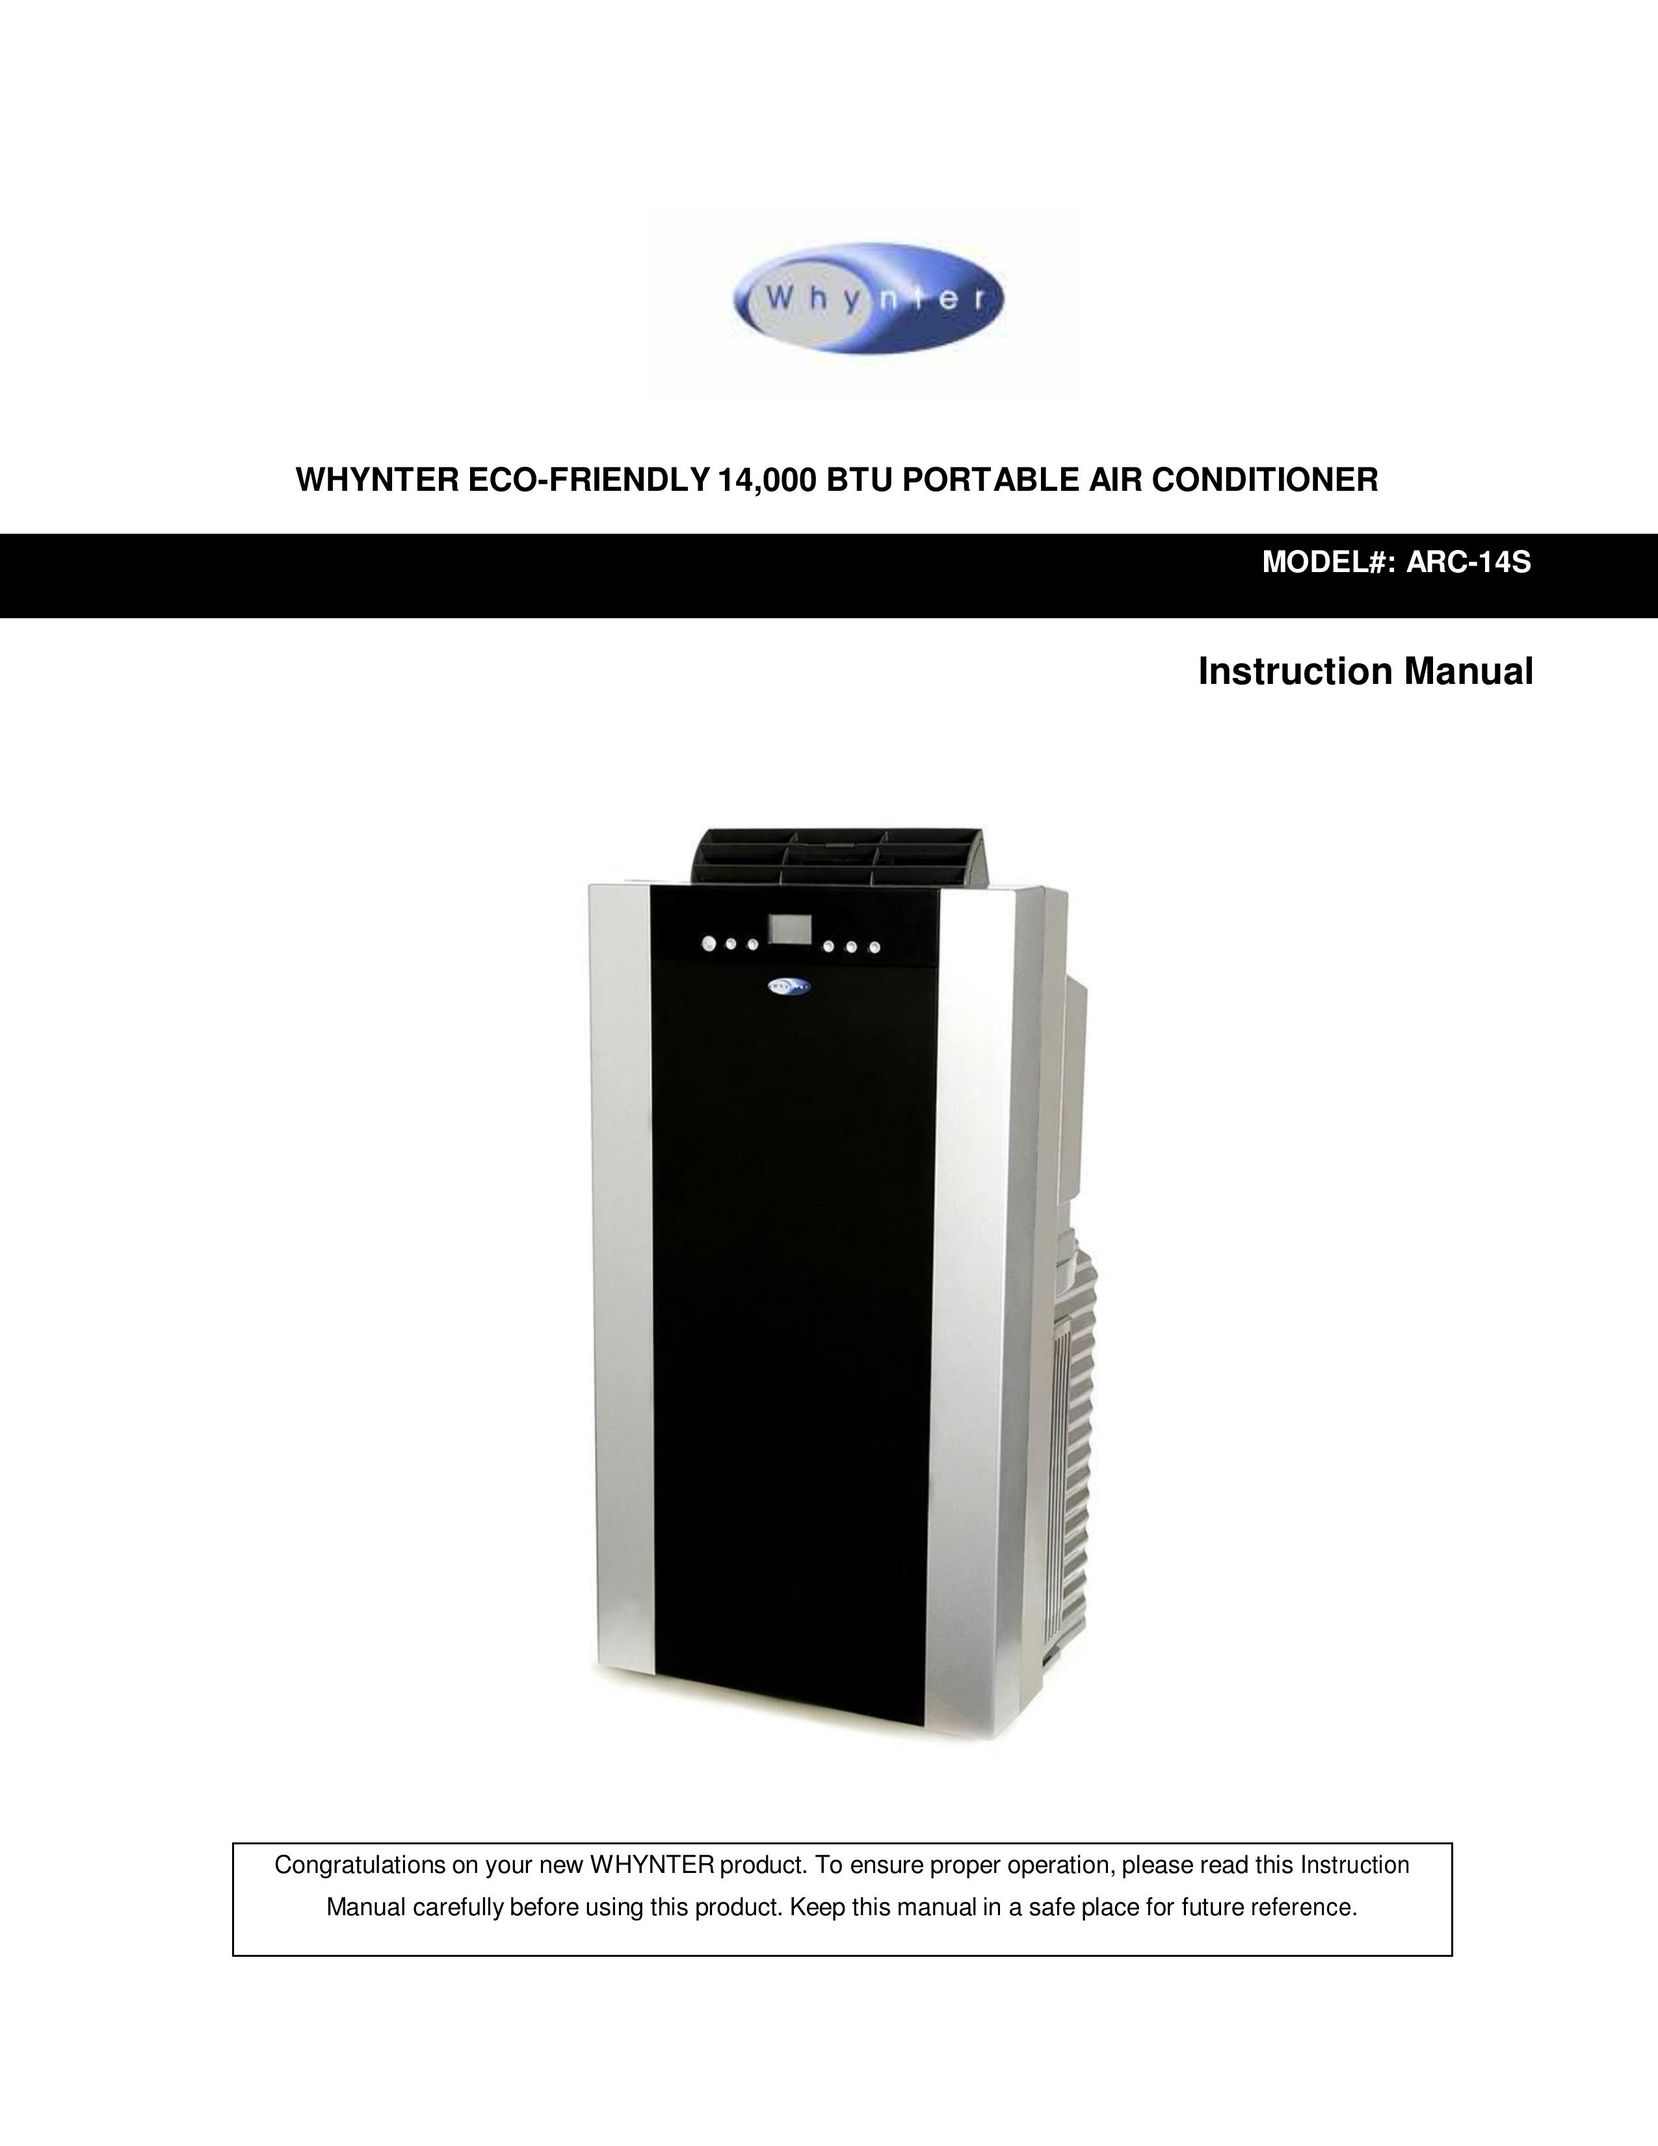 Whynter ARC-14S Air Conditioner User Manual